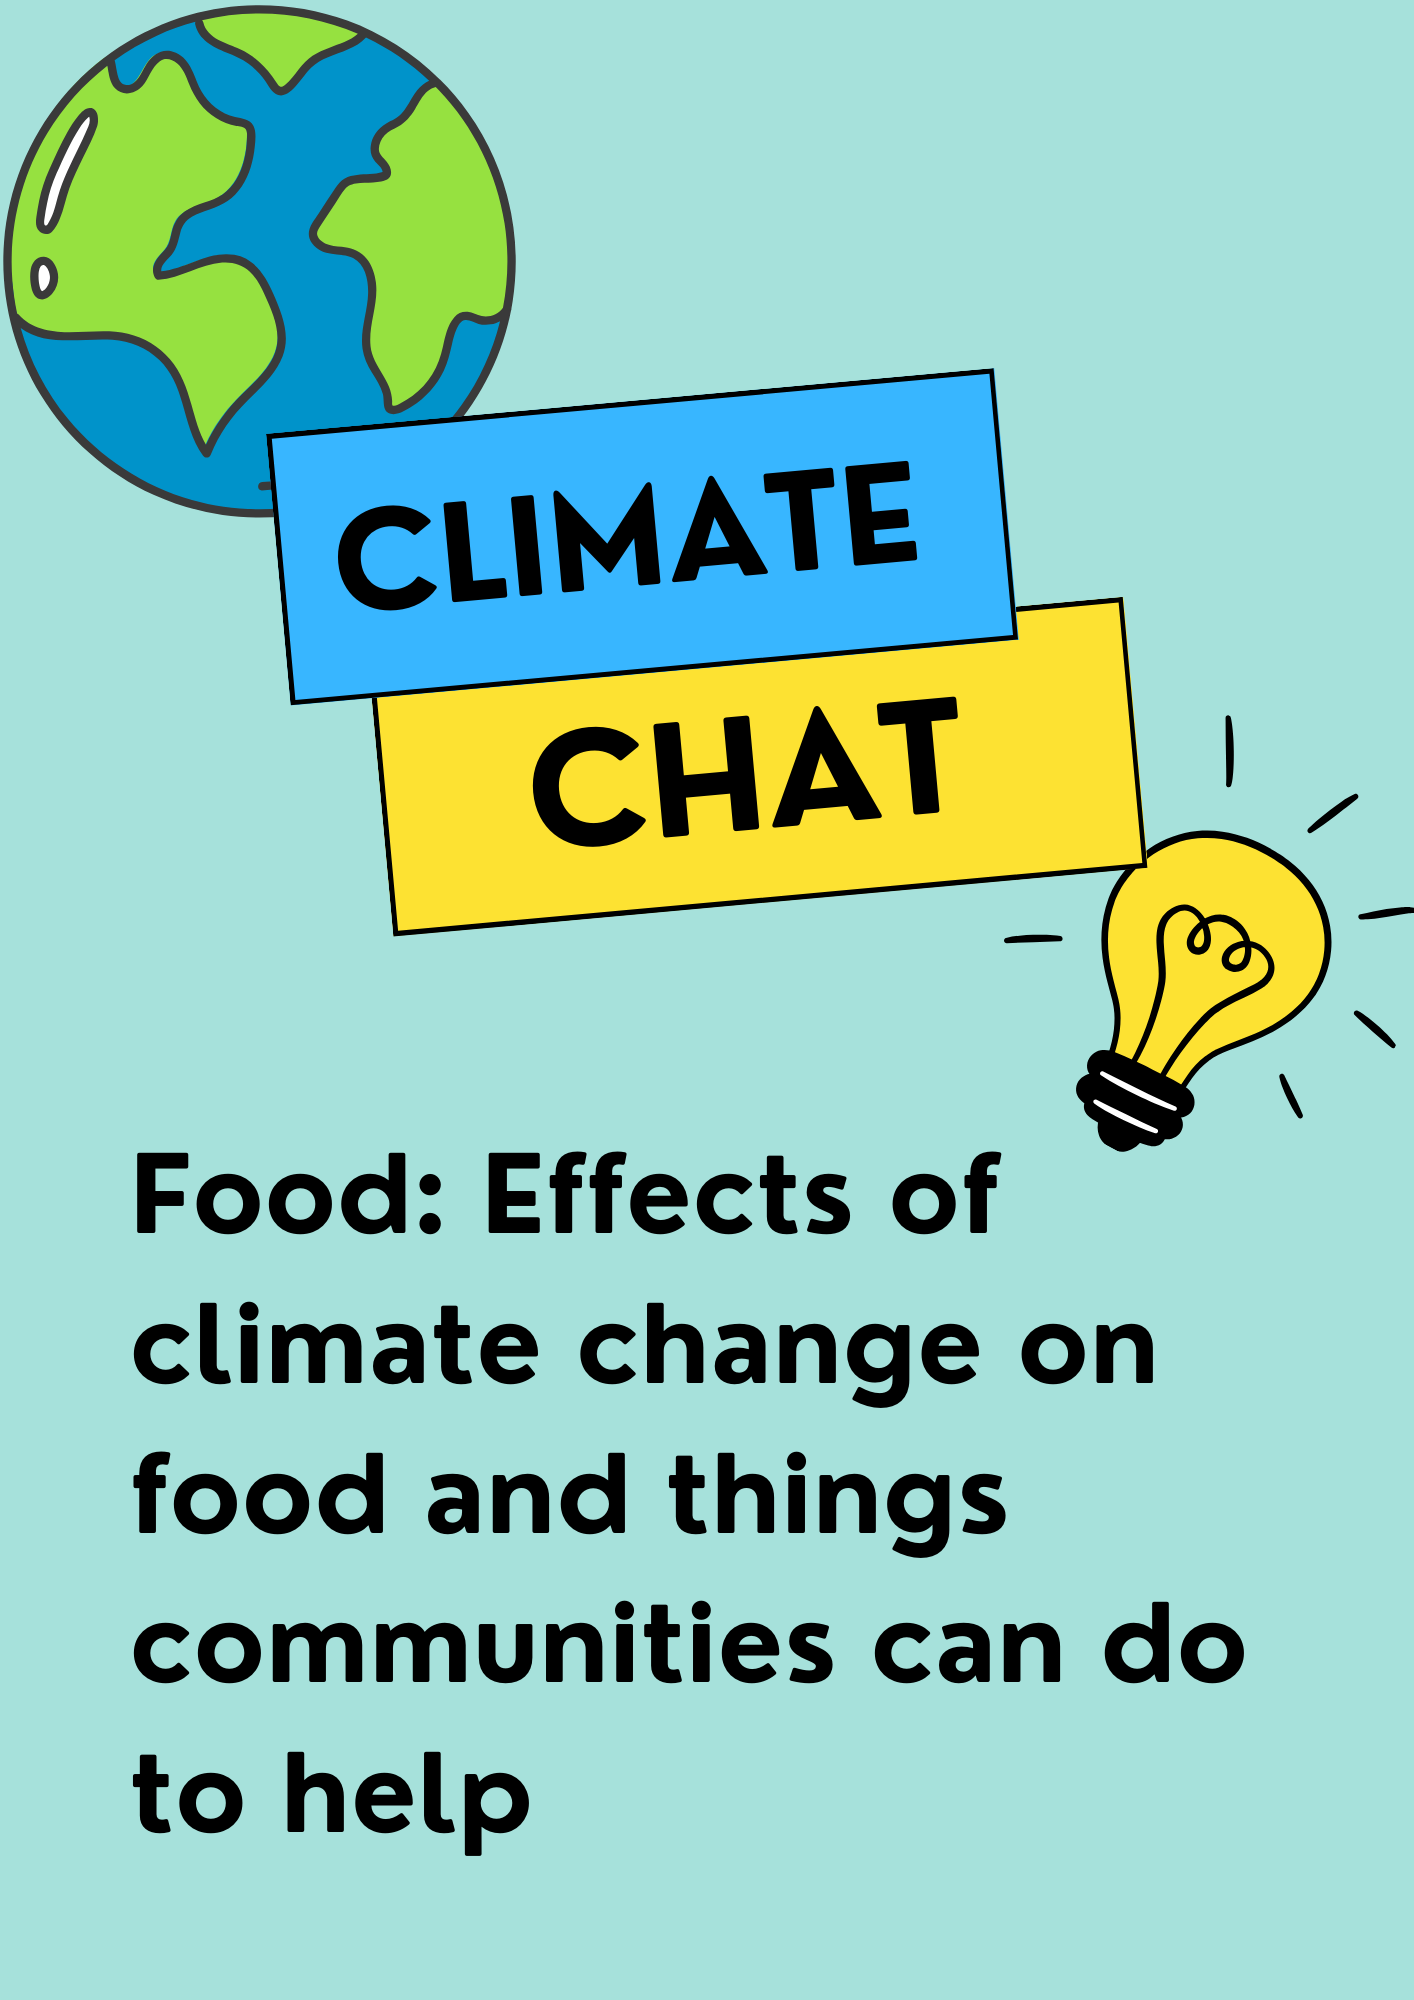 Food: Effects of climate change on food and things communities can do to help